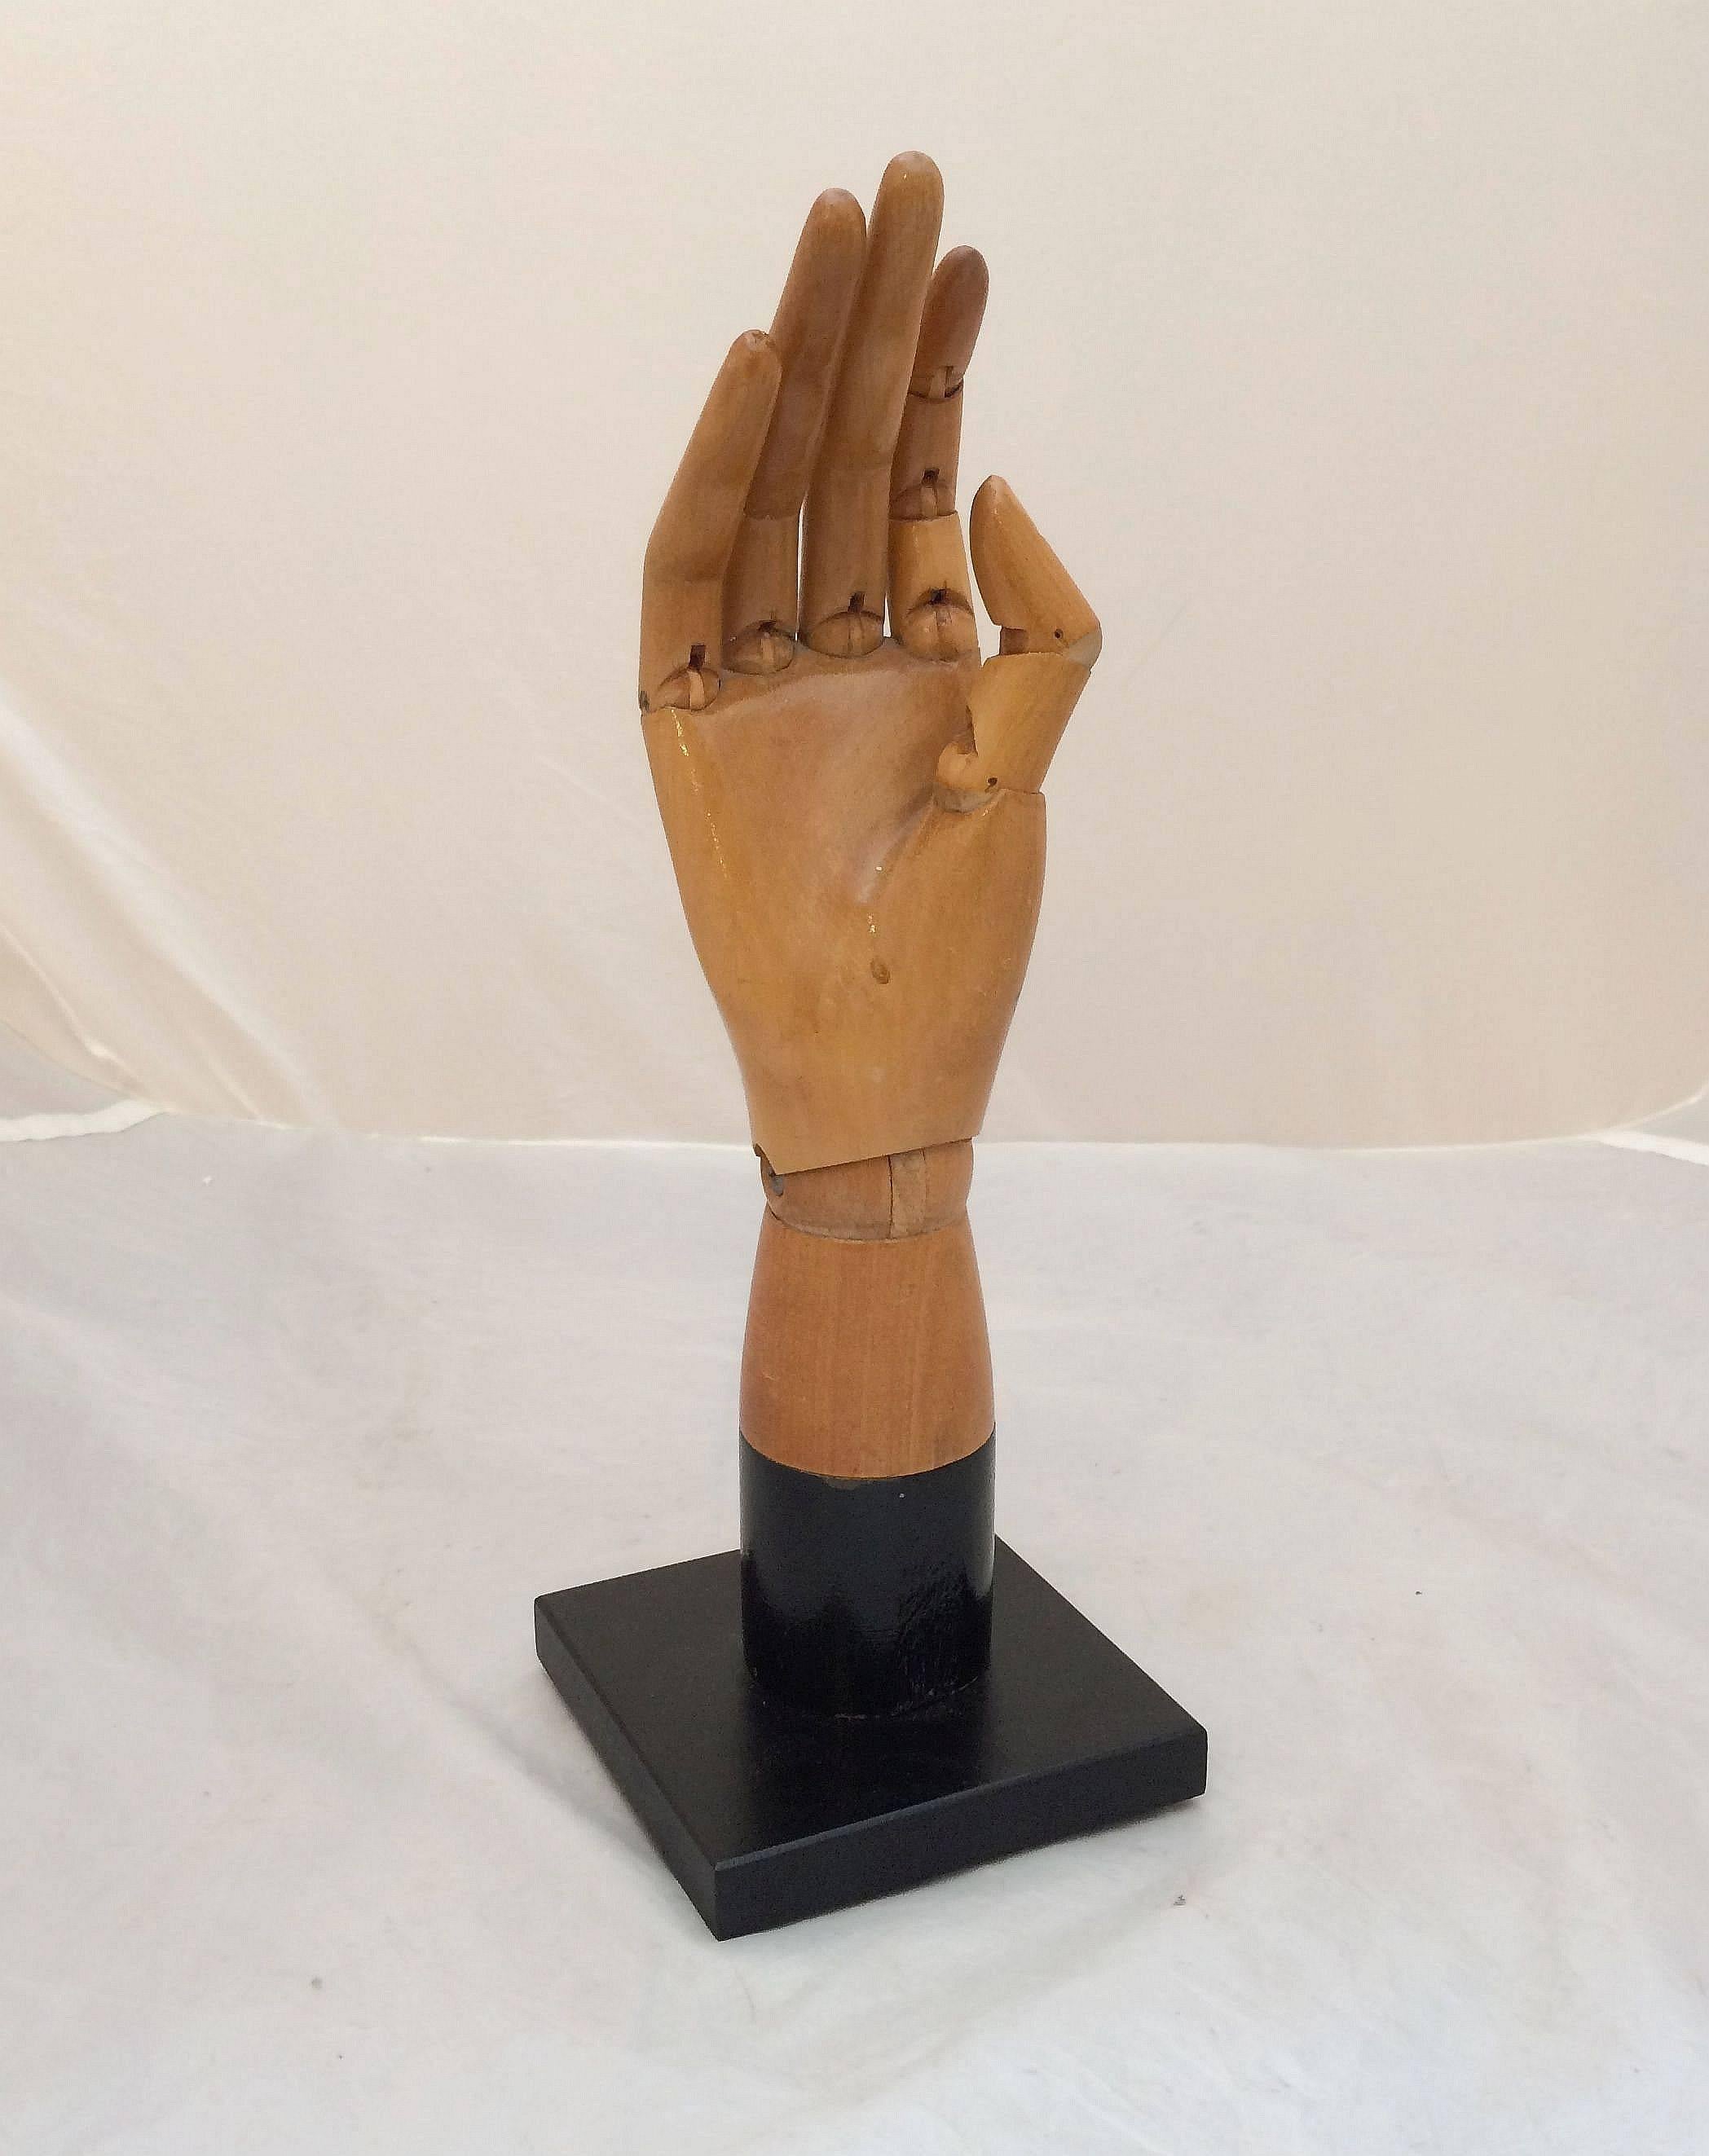 A fine English articulating model of a hand, mounted to an ebonized square base.